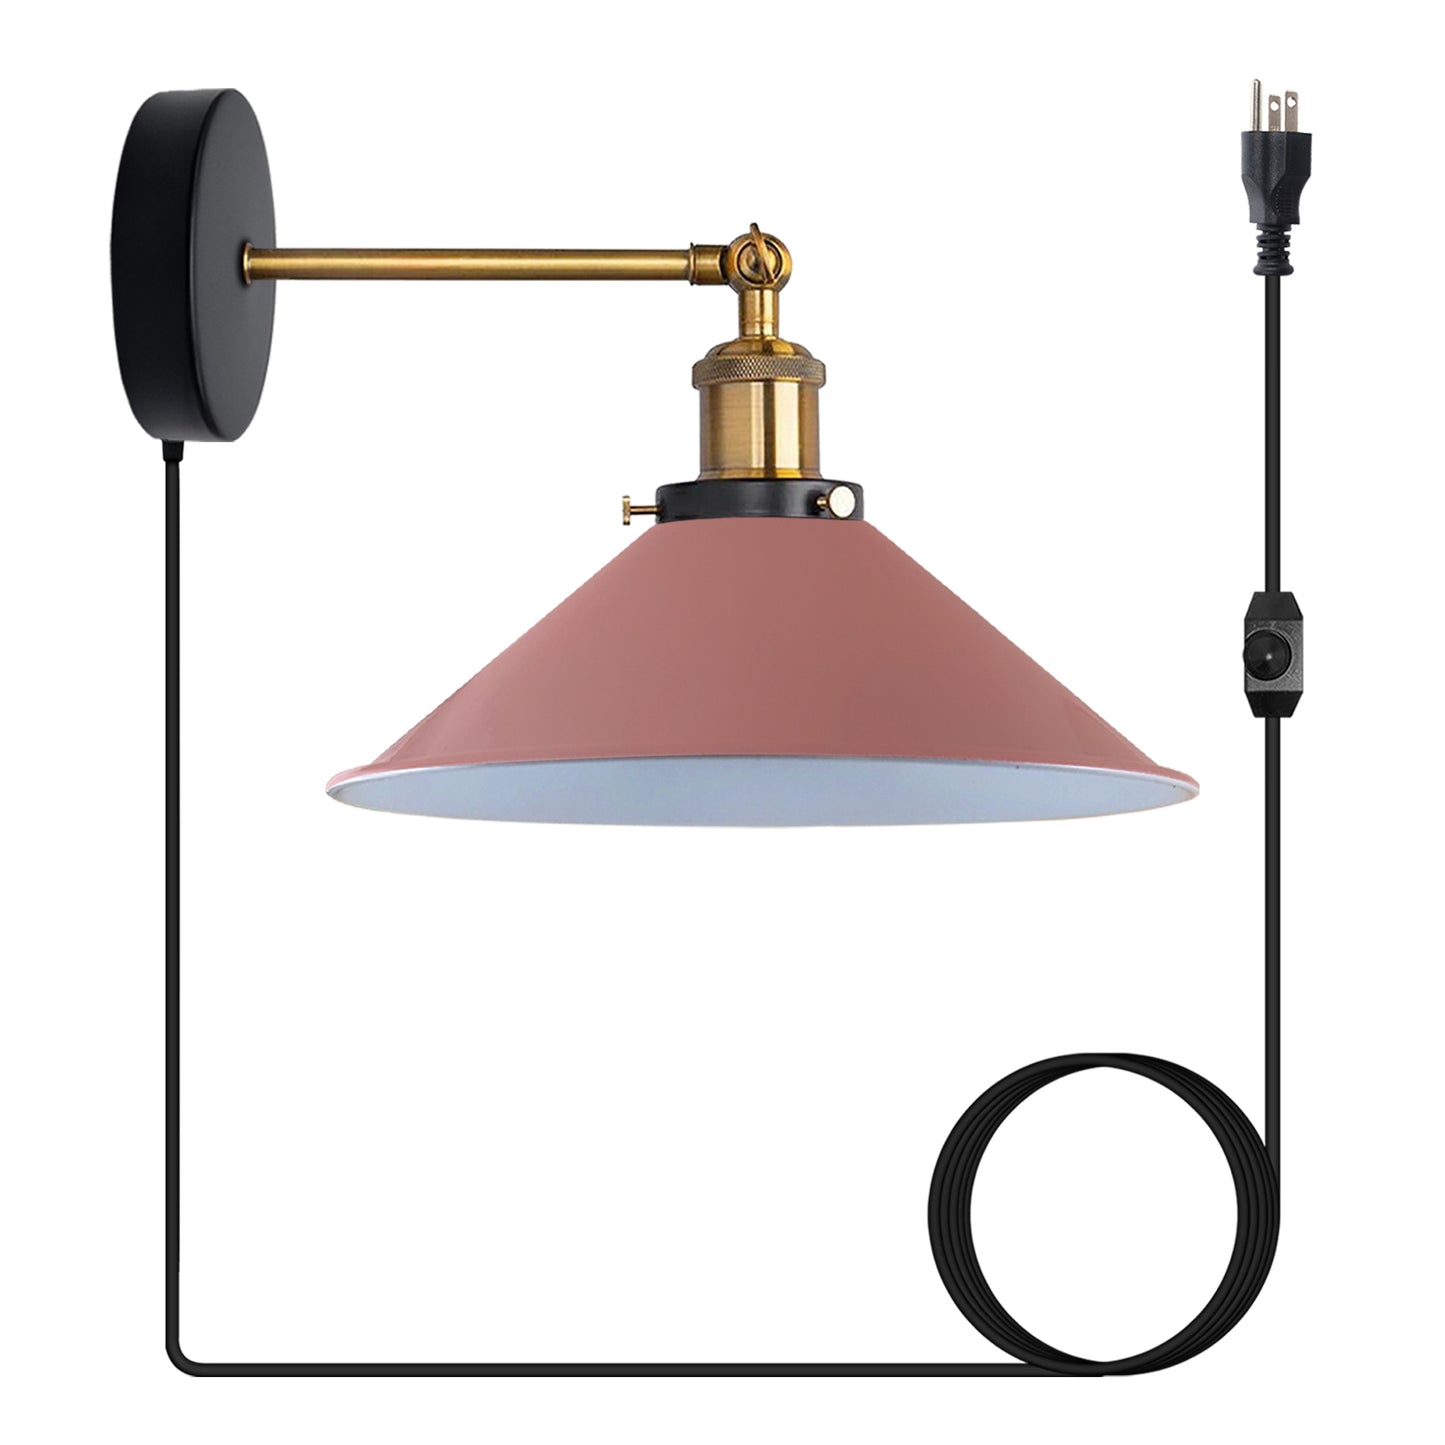 rose gold plug in wall light with dimmer switch.JPG